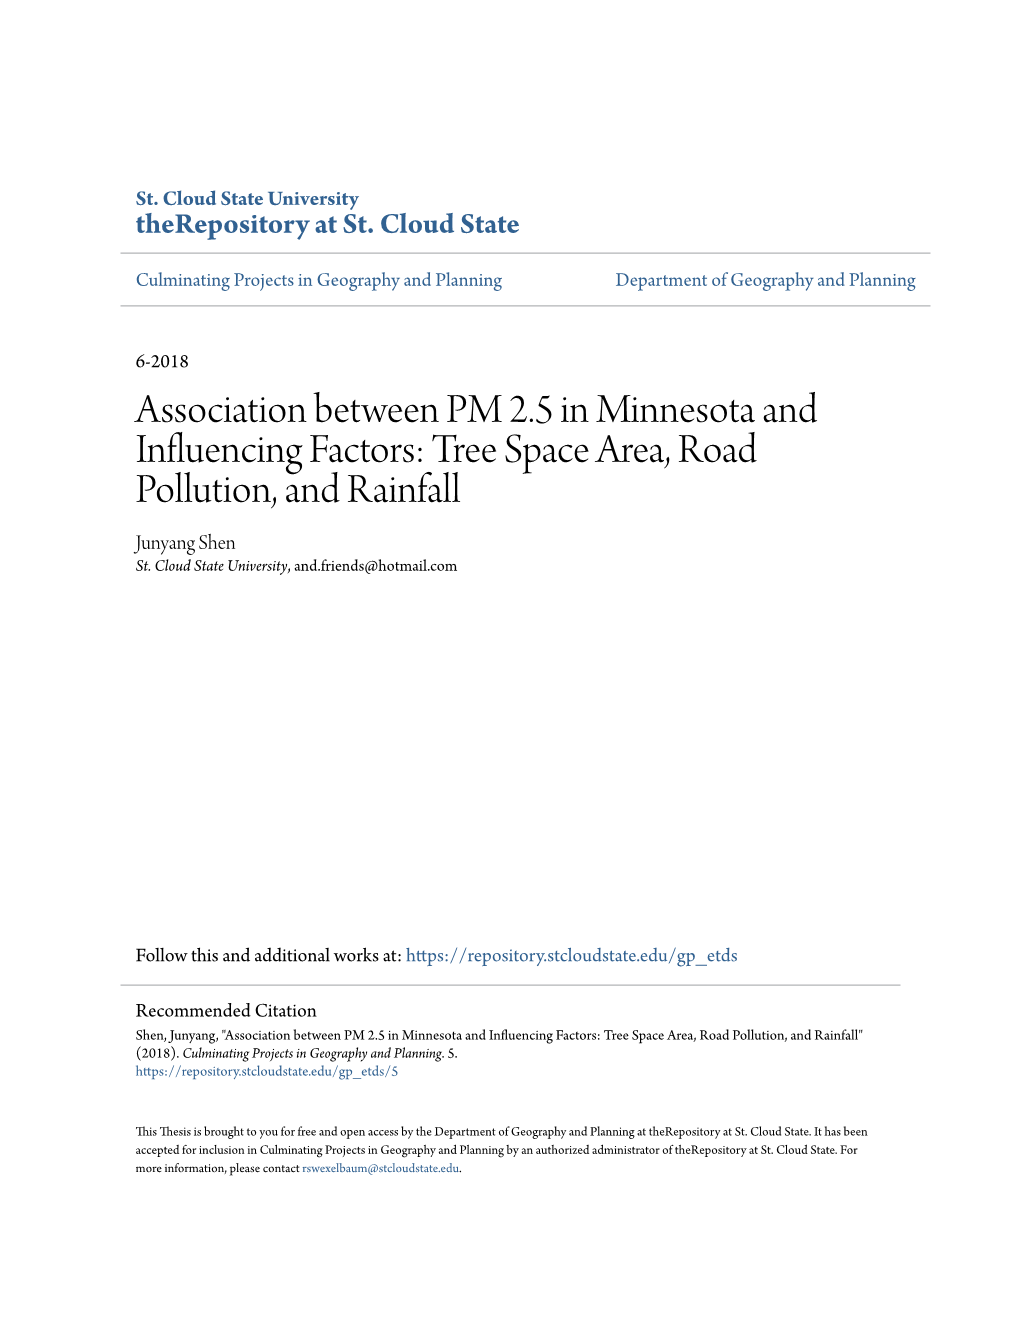 Association Between PM 2.5 in Minnesota and Influencing Factors: Tree Space Area, Road Pollution, and Rainfall Junyang Shen St